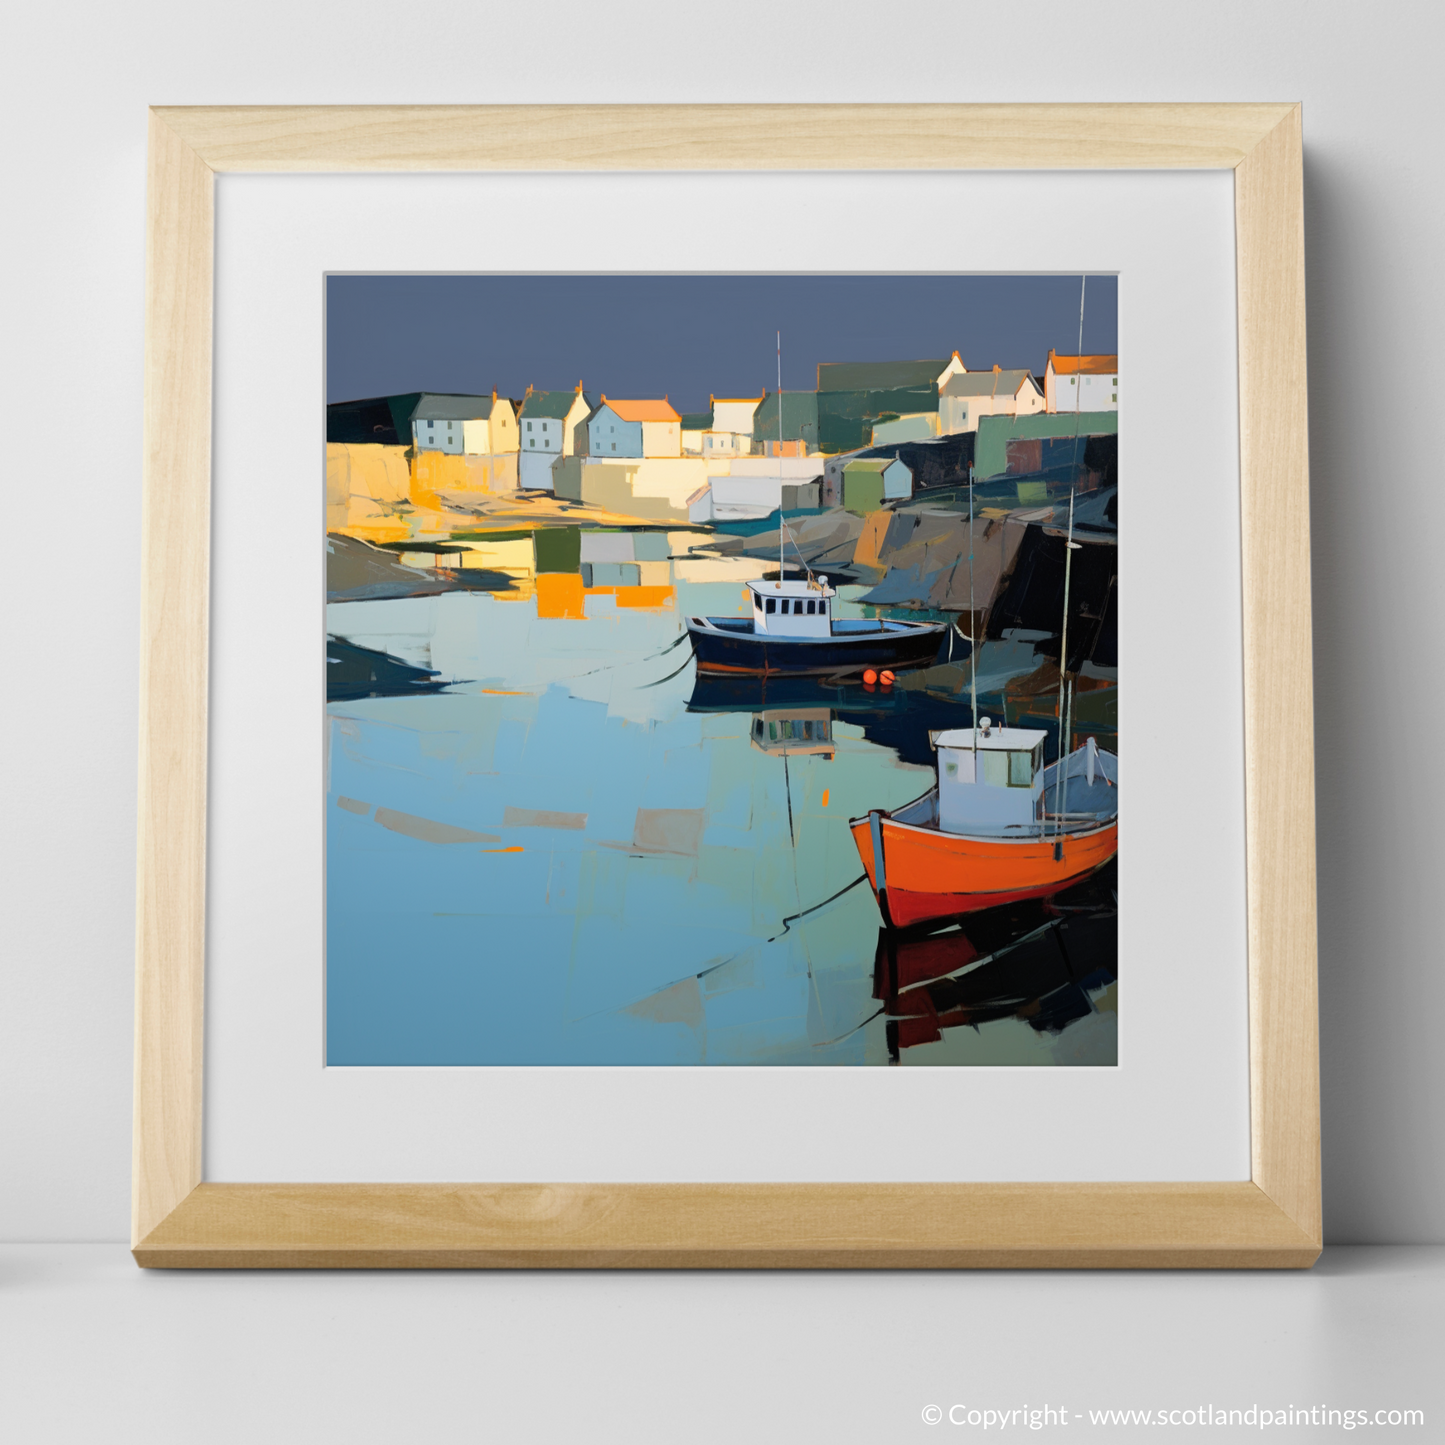 Dusk at Portnahaven Harbour: A Contemporary Symphony of Light and Shadow